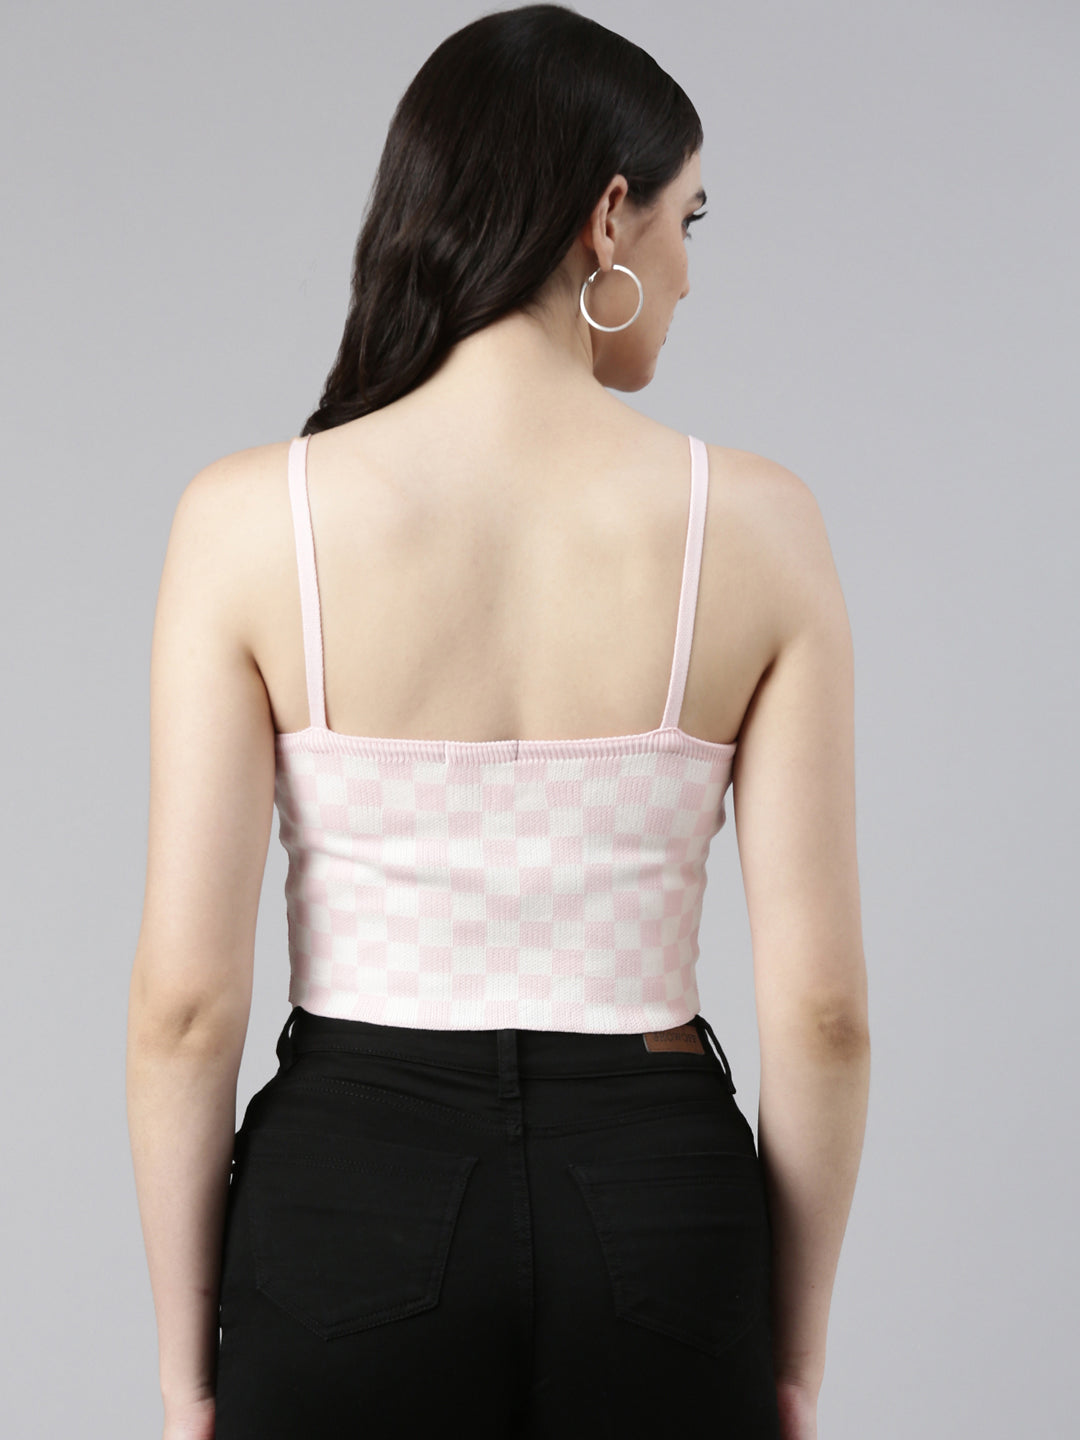 Shoulder Straps Checked Sleeveless Fitted Pink Crop Top